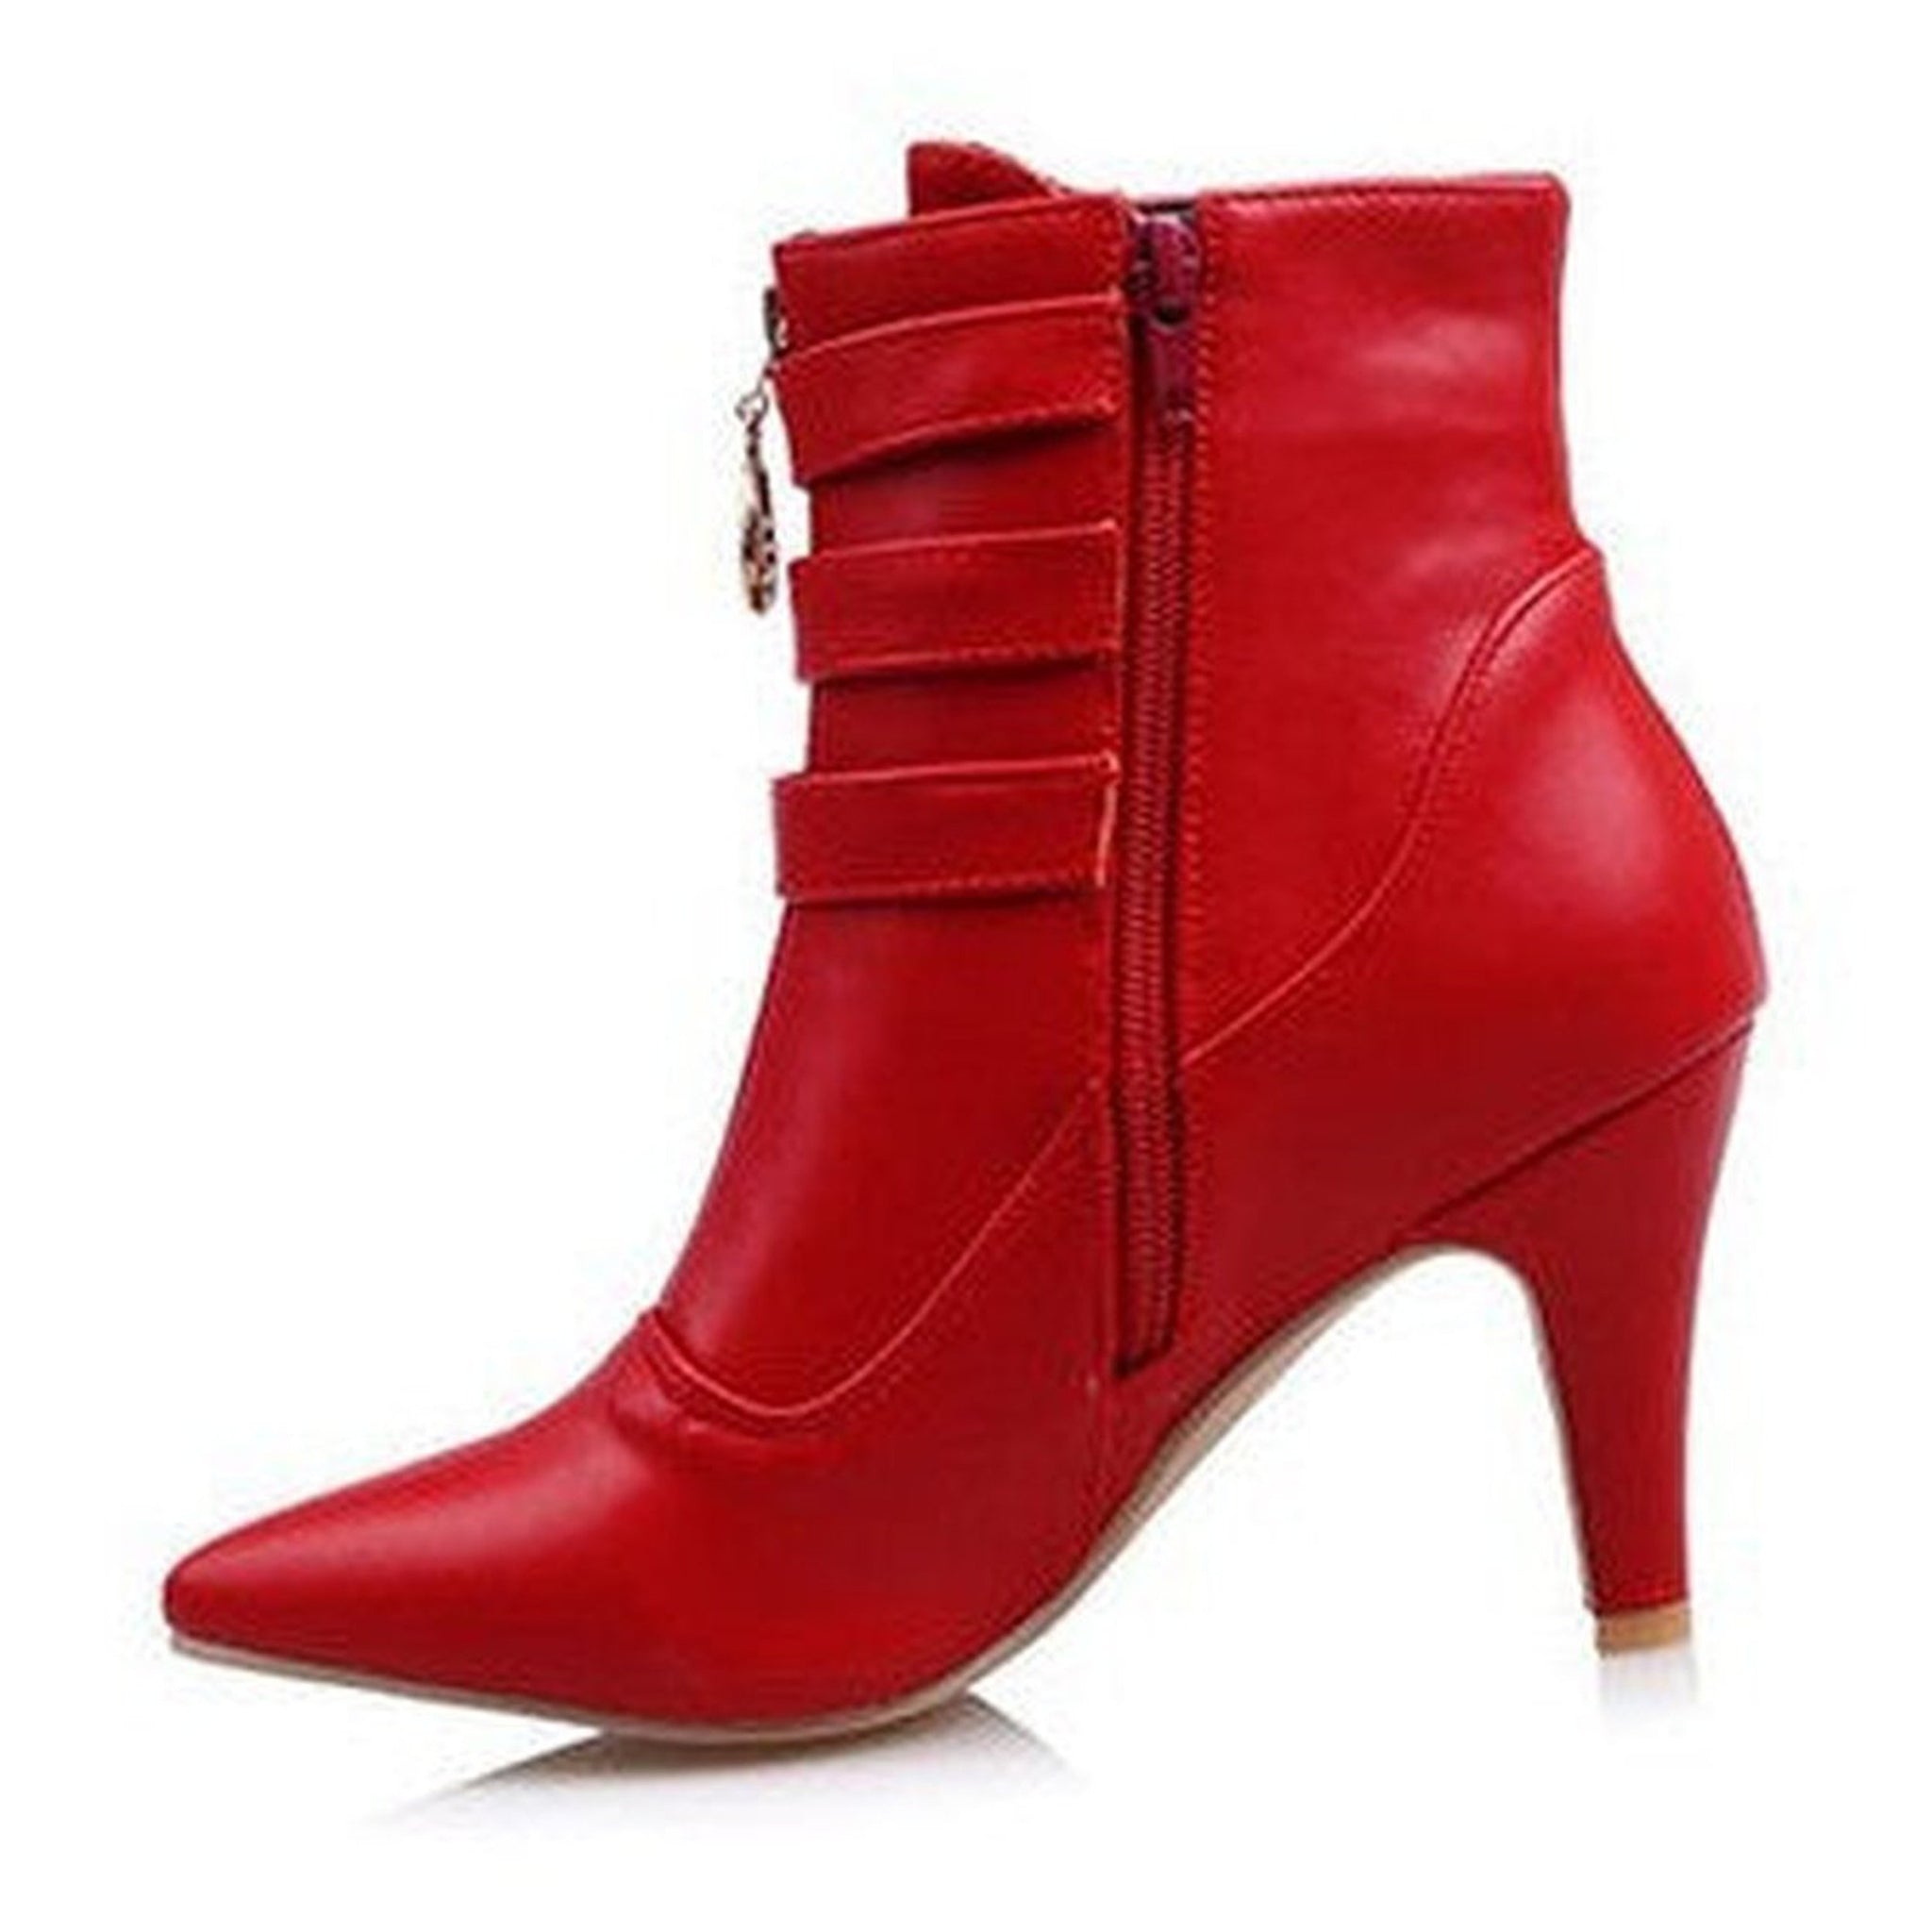 Zipper Front Strap and Buckle Bootie - Kitty Heel